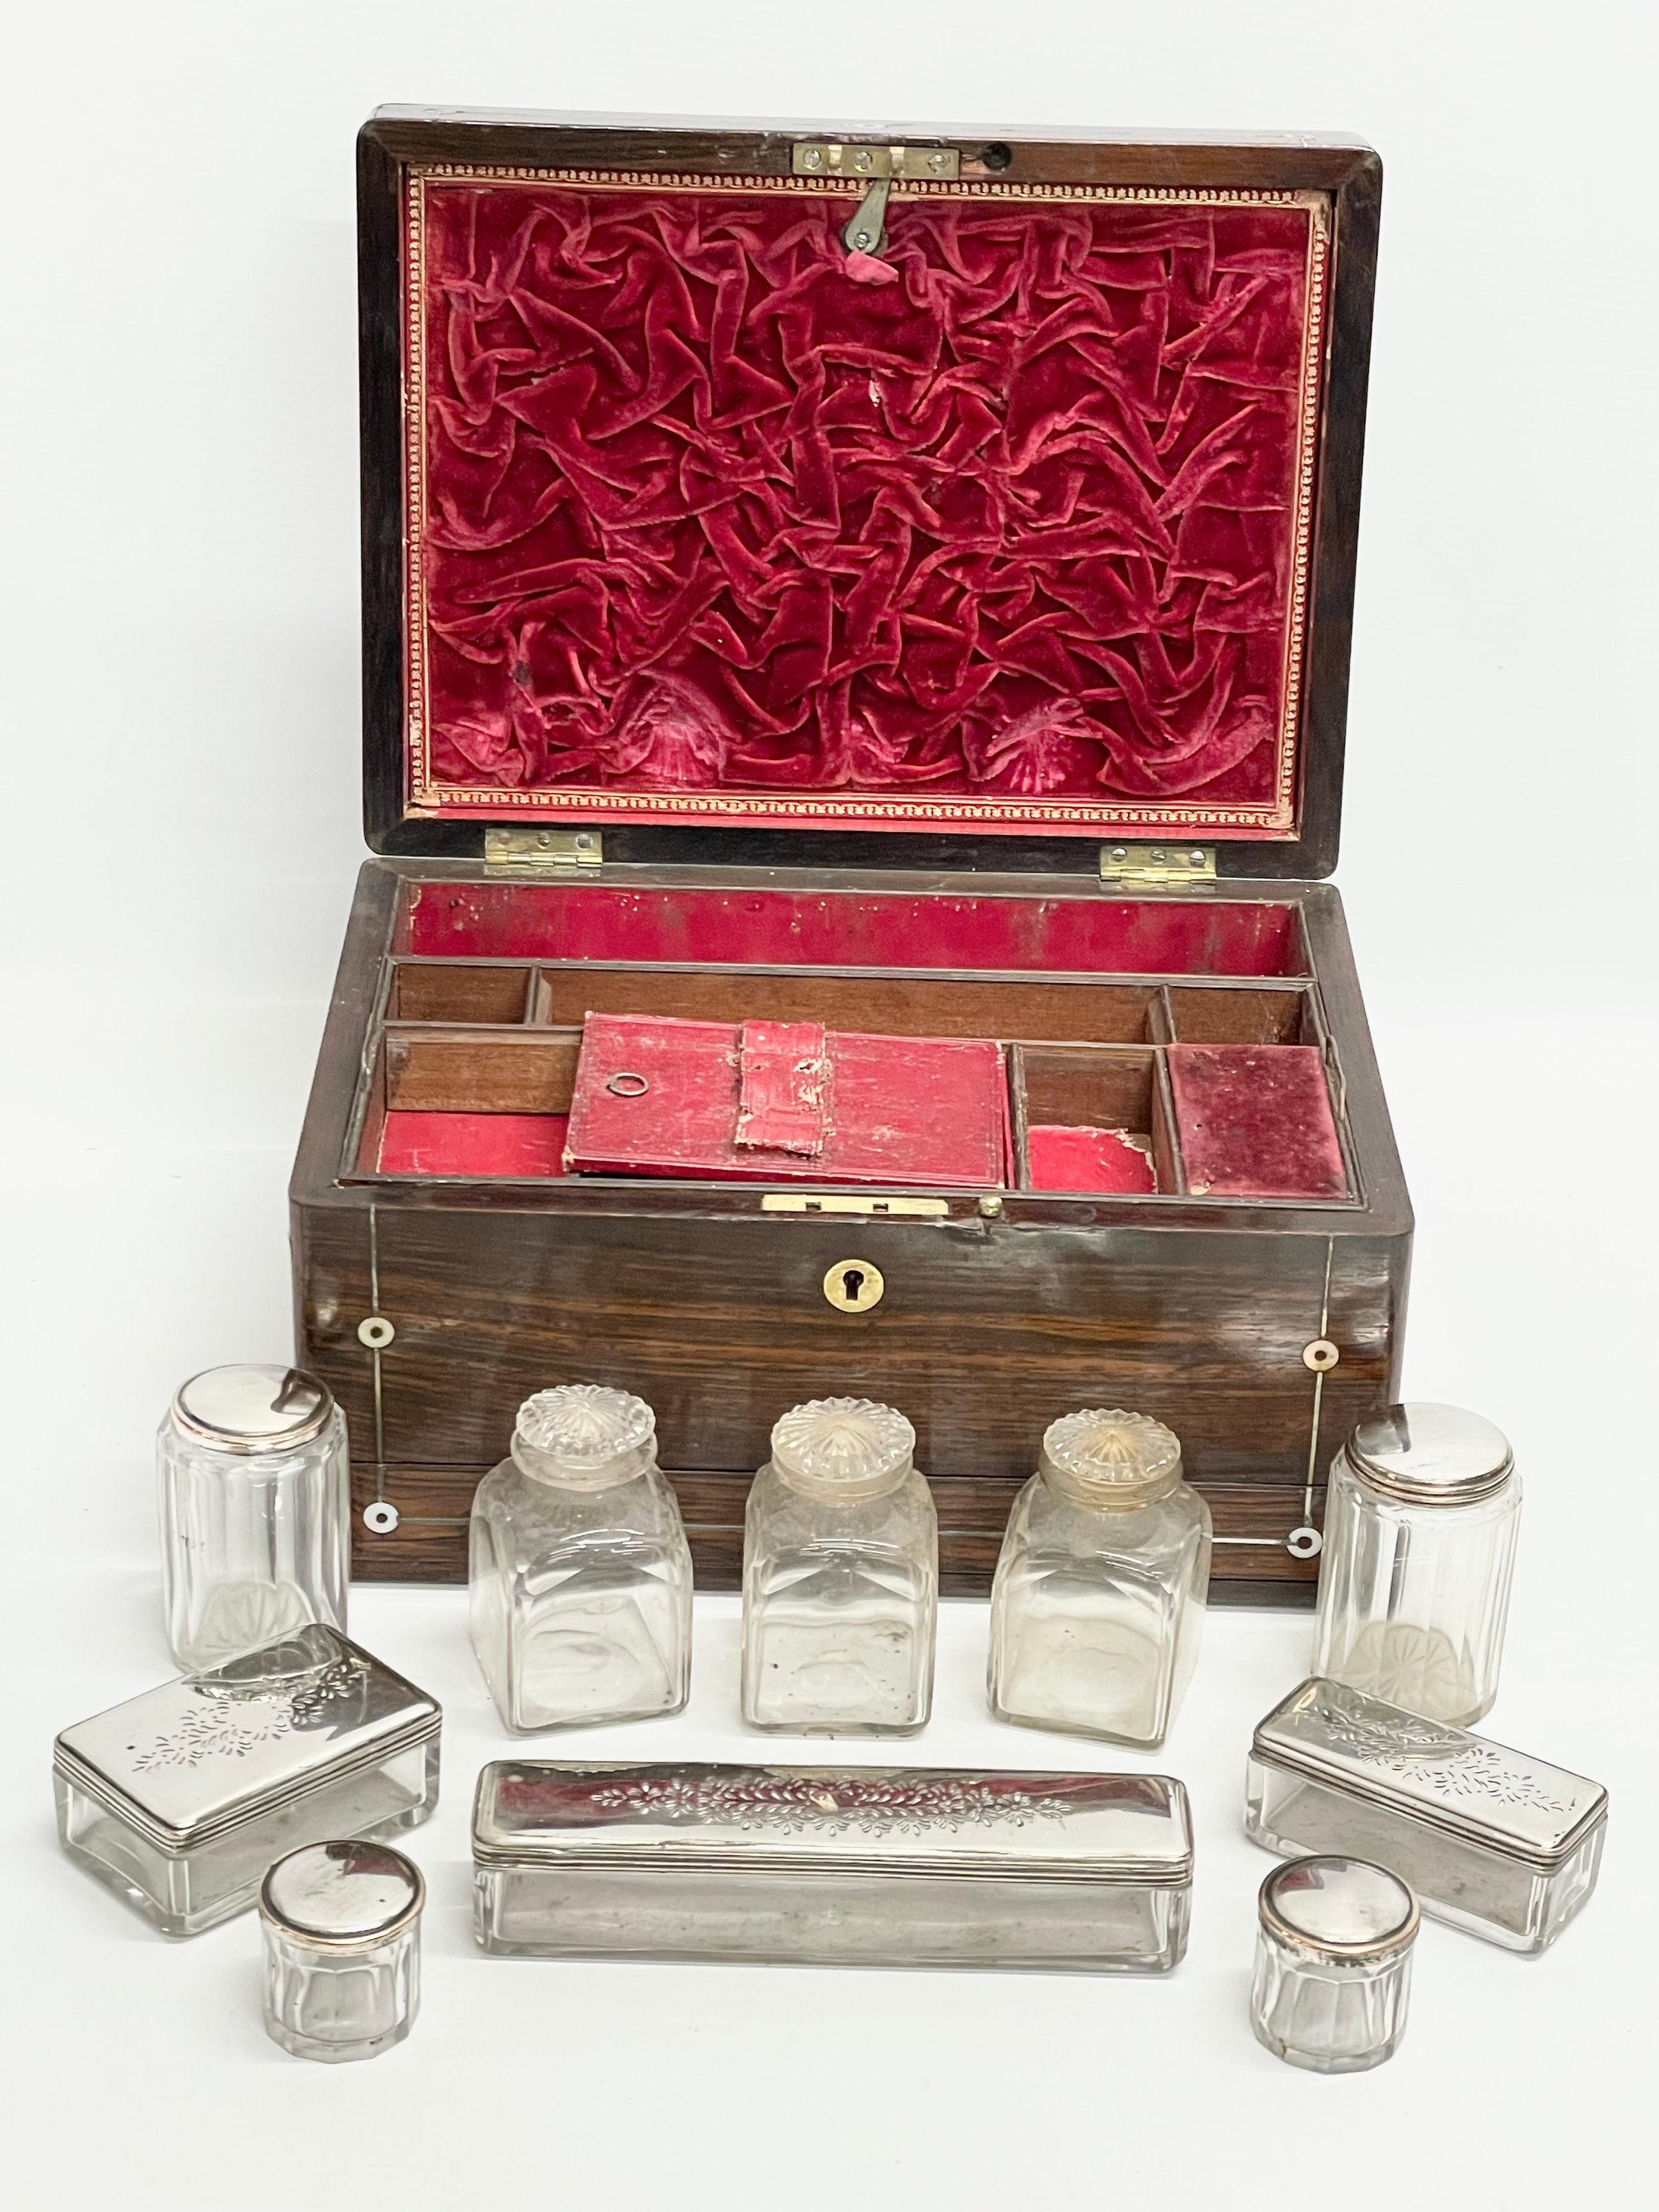 A Victorian rosewood vanity box with Mother of Pearl inlay and cut glass bottles with silver - Image 10 of 11